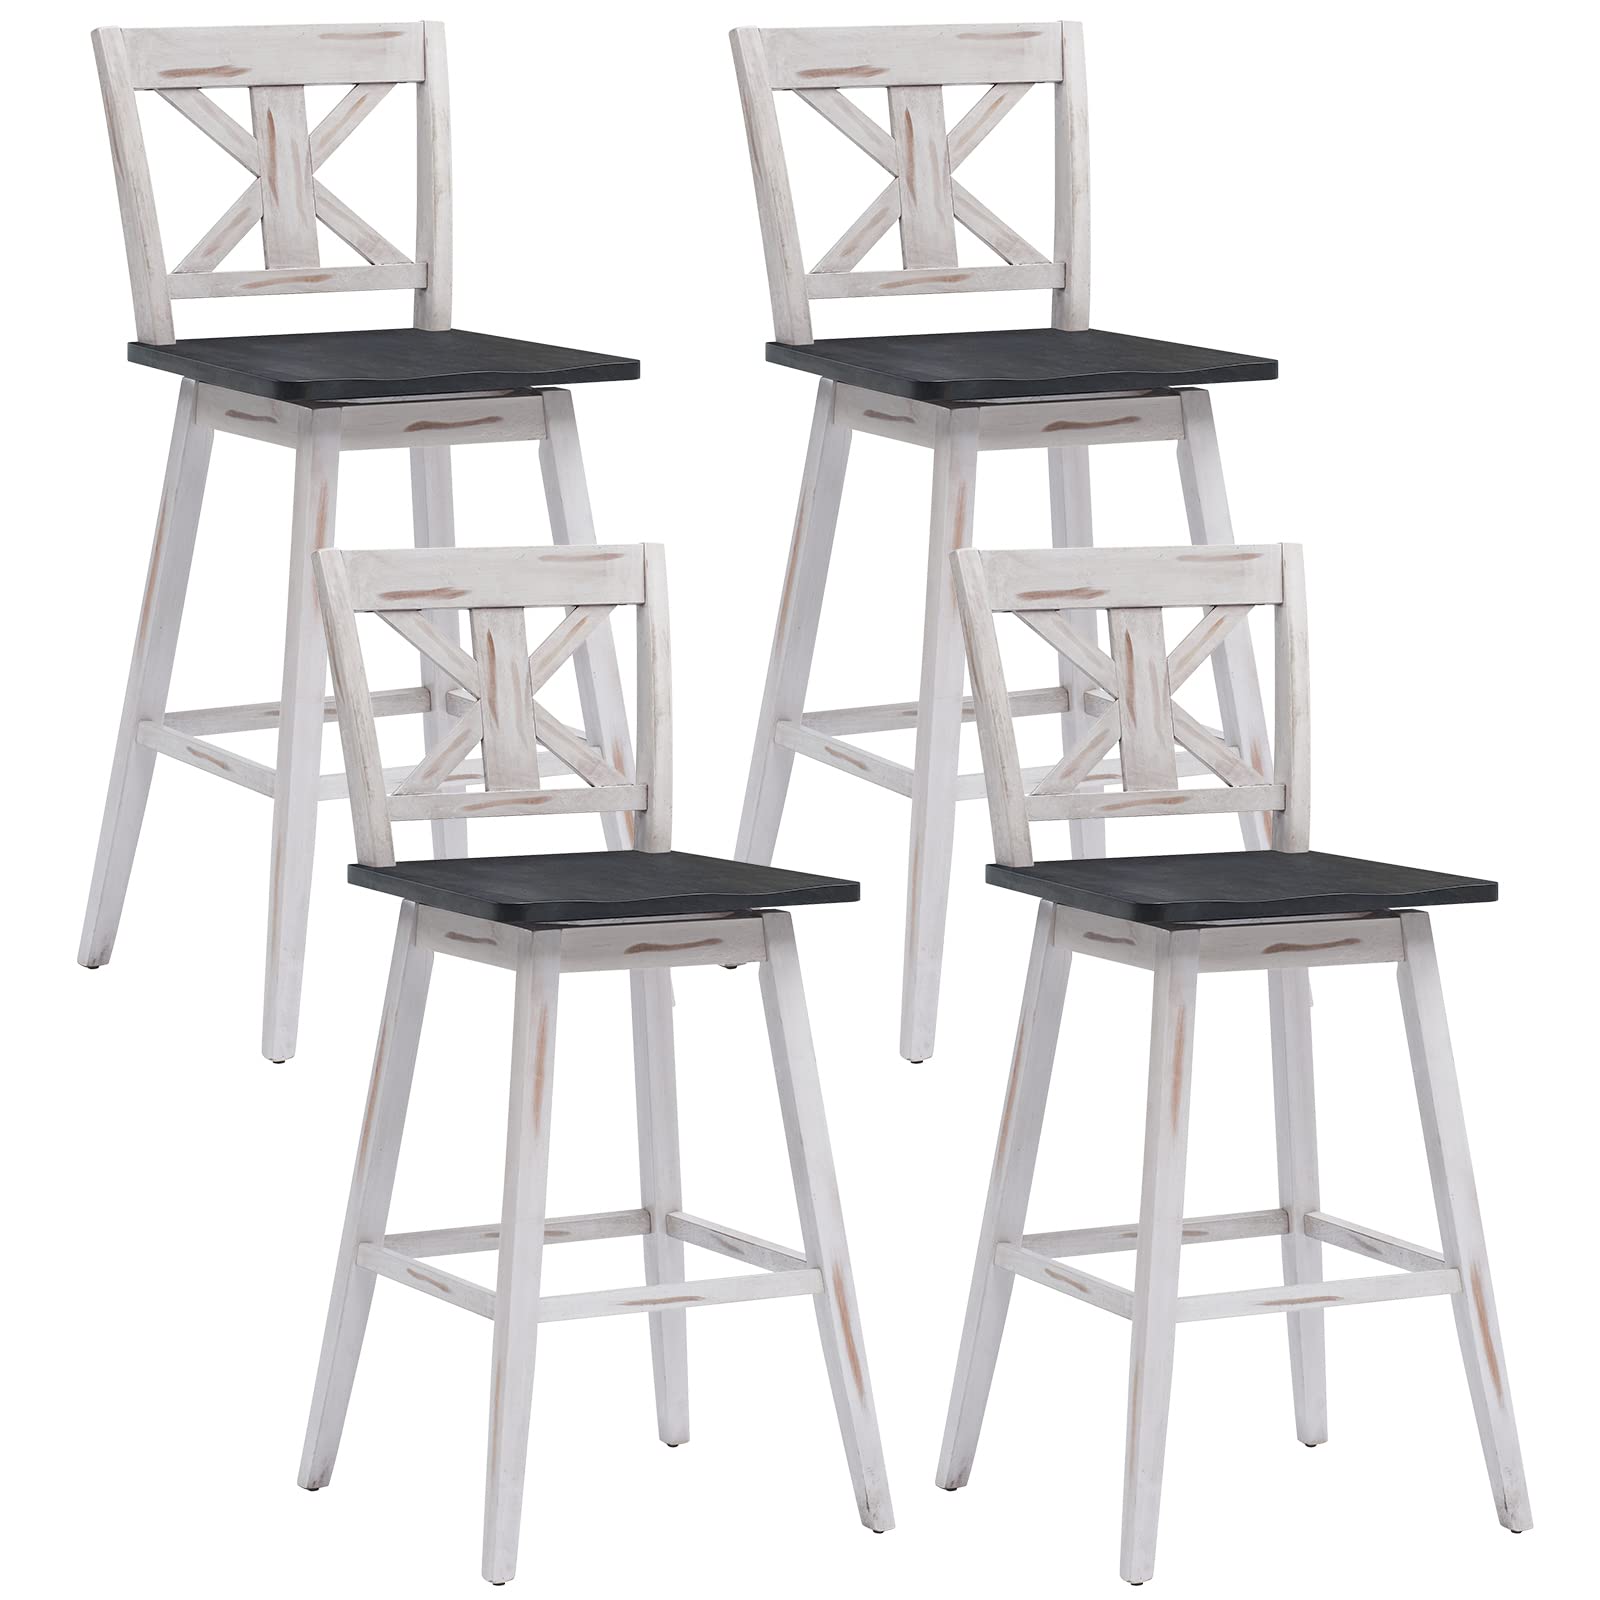 360 Degree Rubber Wood Bar Chairs, Vintage Bar Stools for Home, Restaurant & Pub